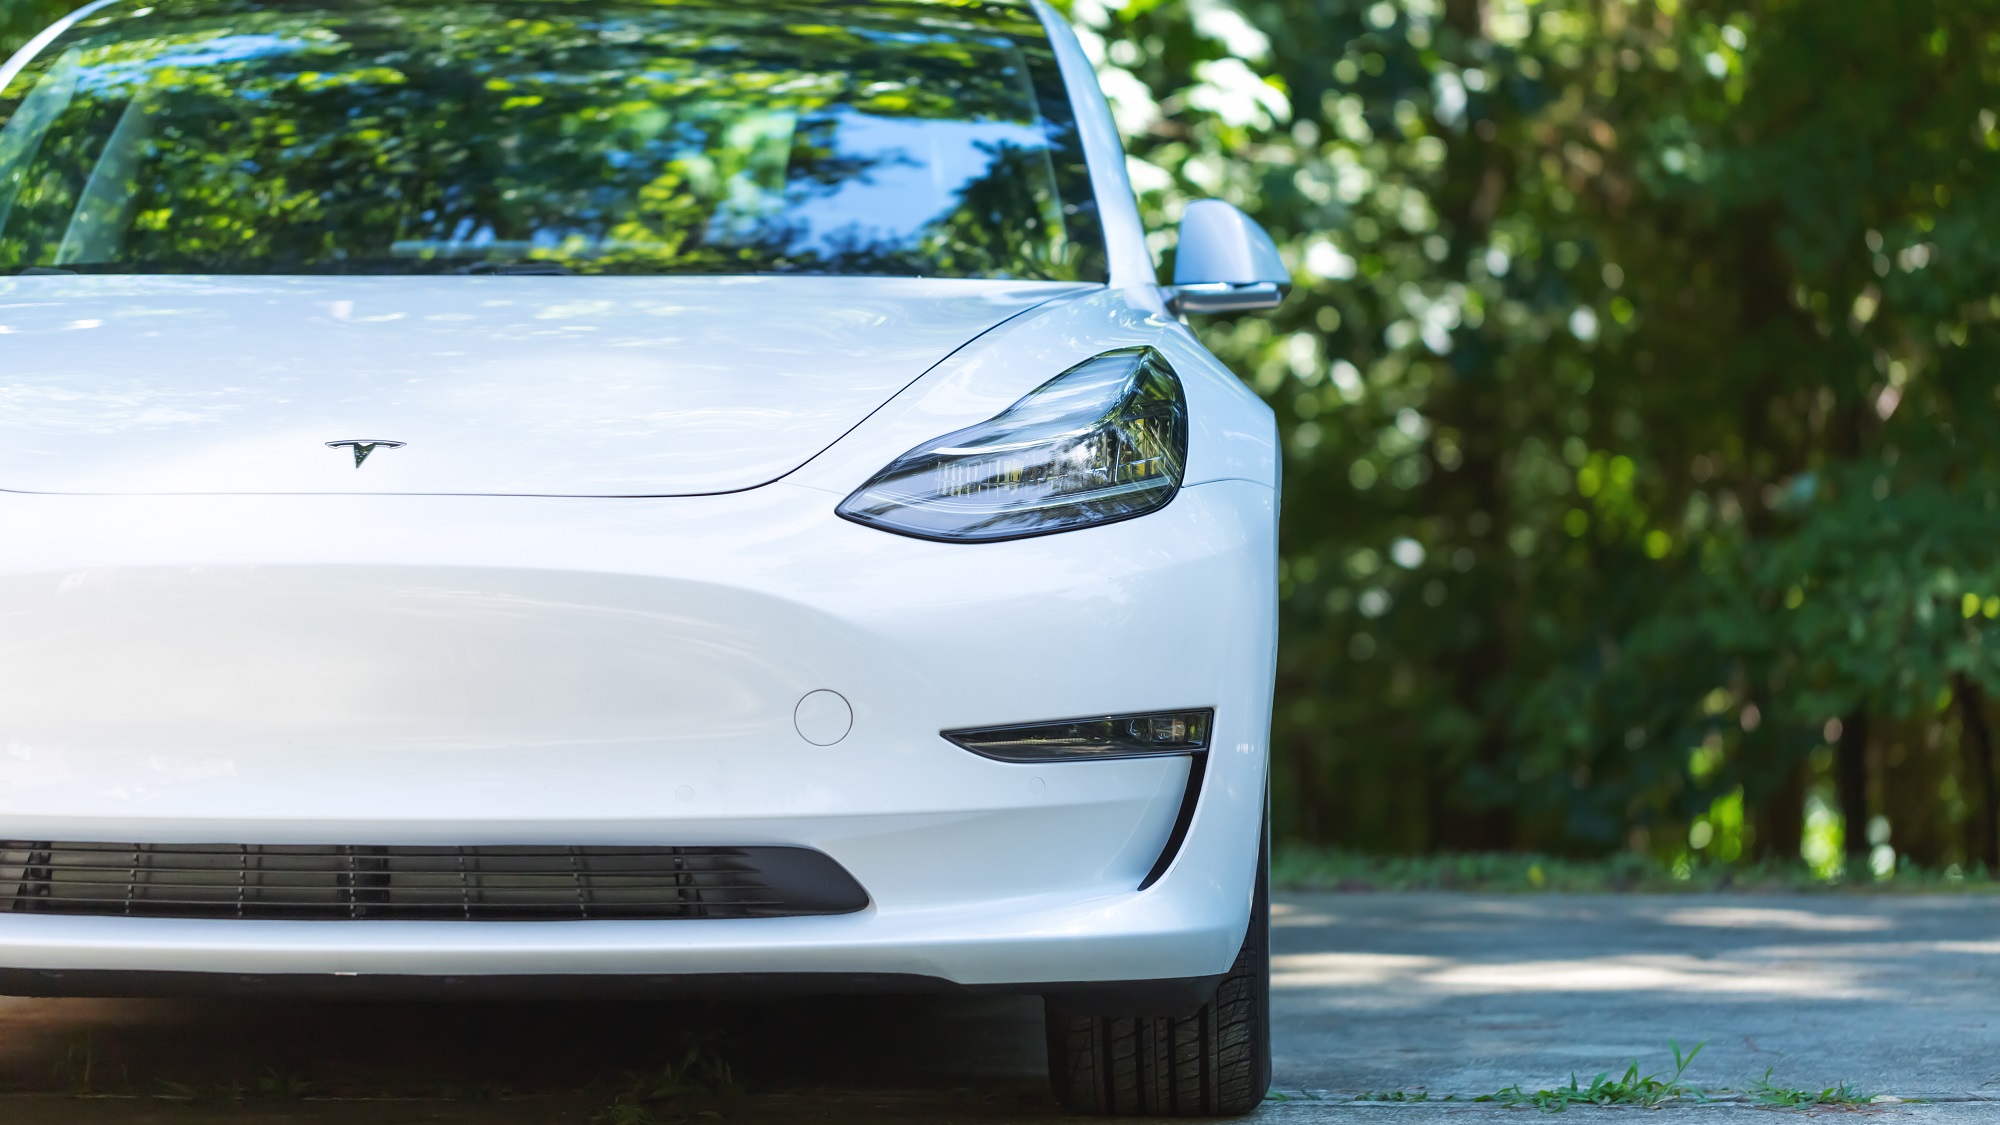 A white all-electric Tesla Model 3 on a cement road with trees in the background on a sunny day.